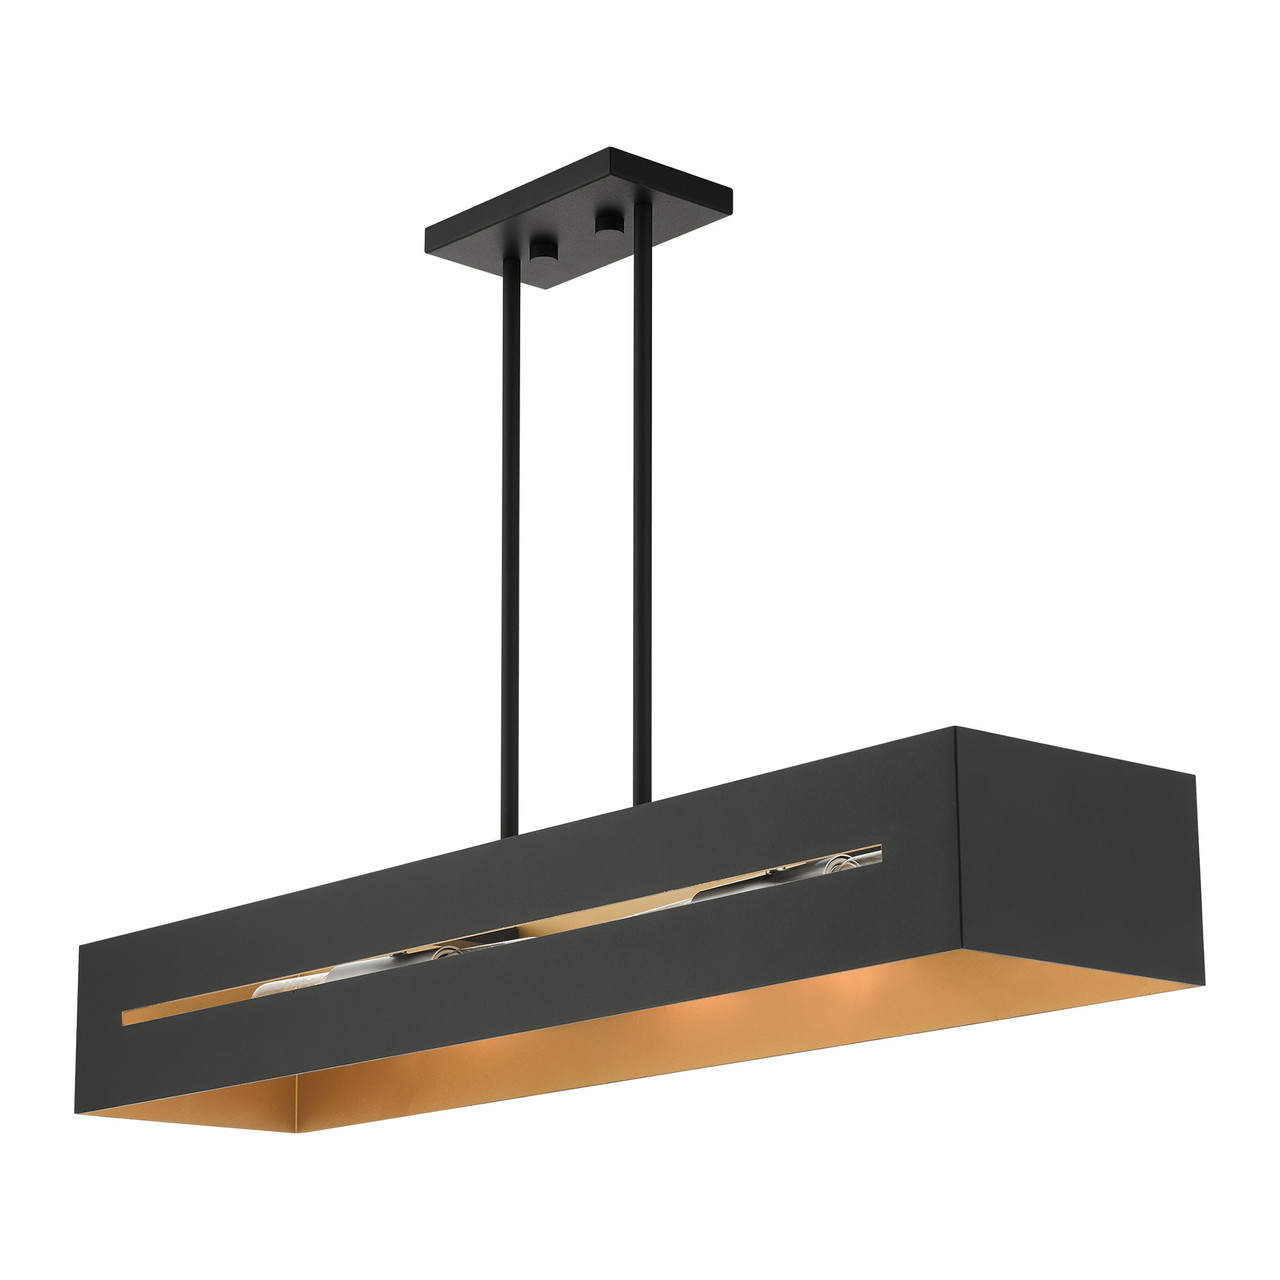 LIVEX LIGHTING 45957-14 Soma 4 Lt Textured Black with Brushed Nickel Accents Linear Chandelier